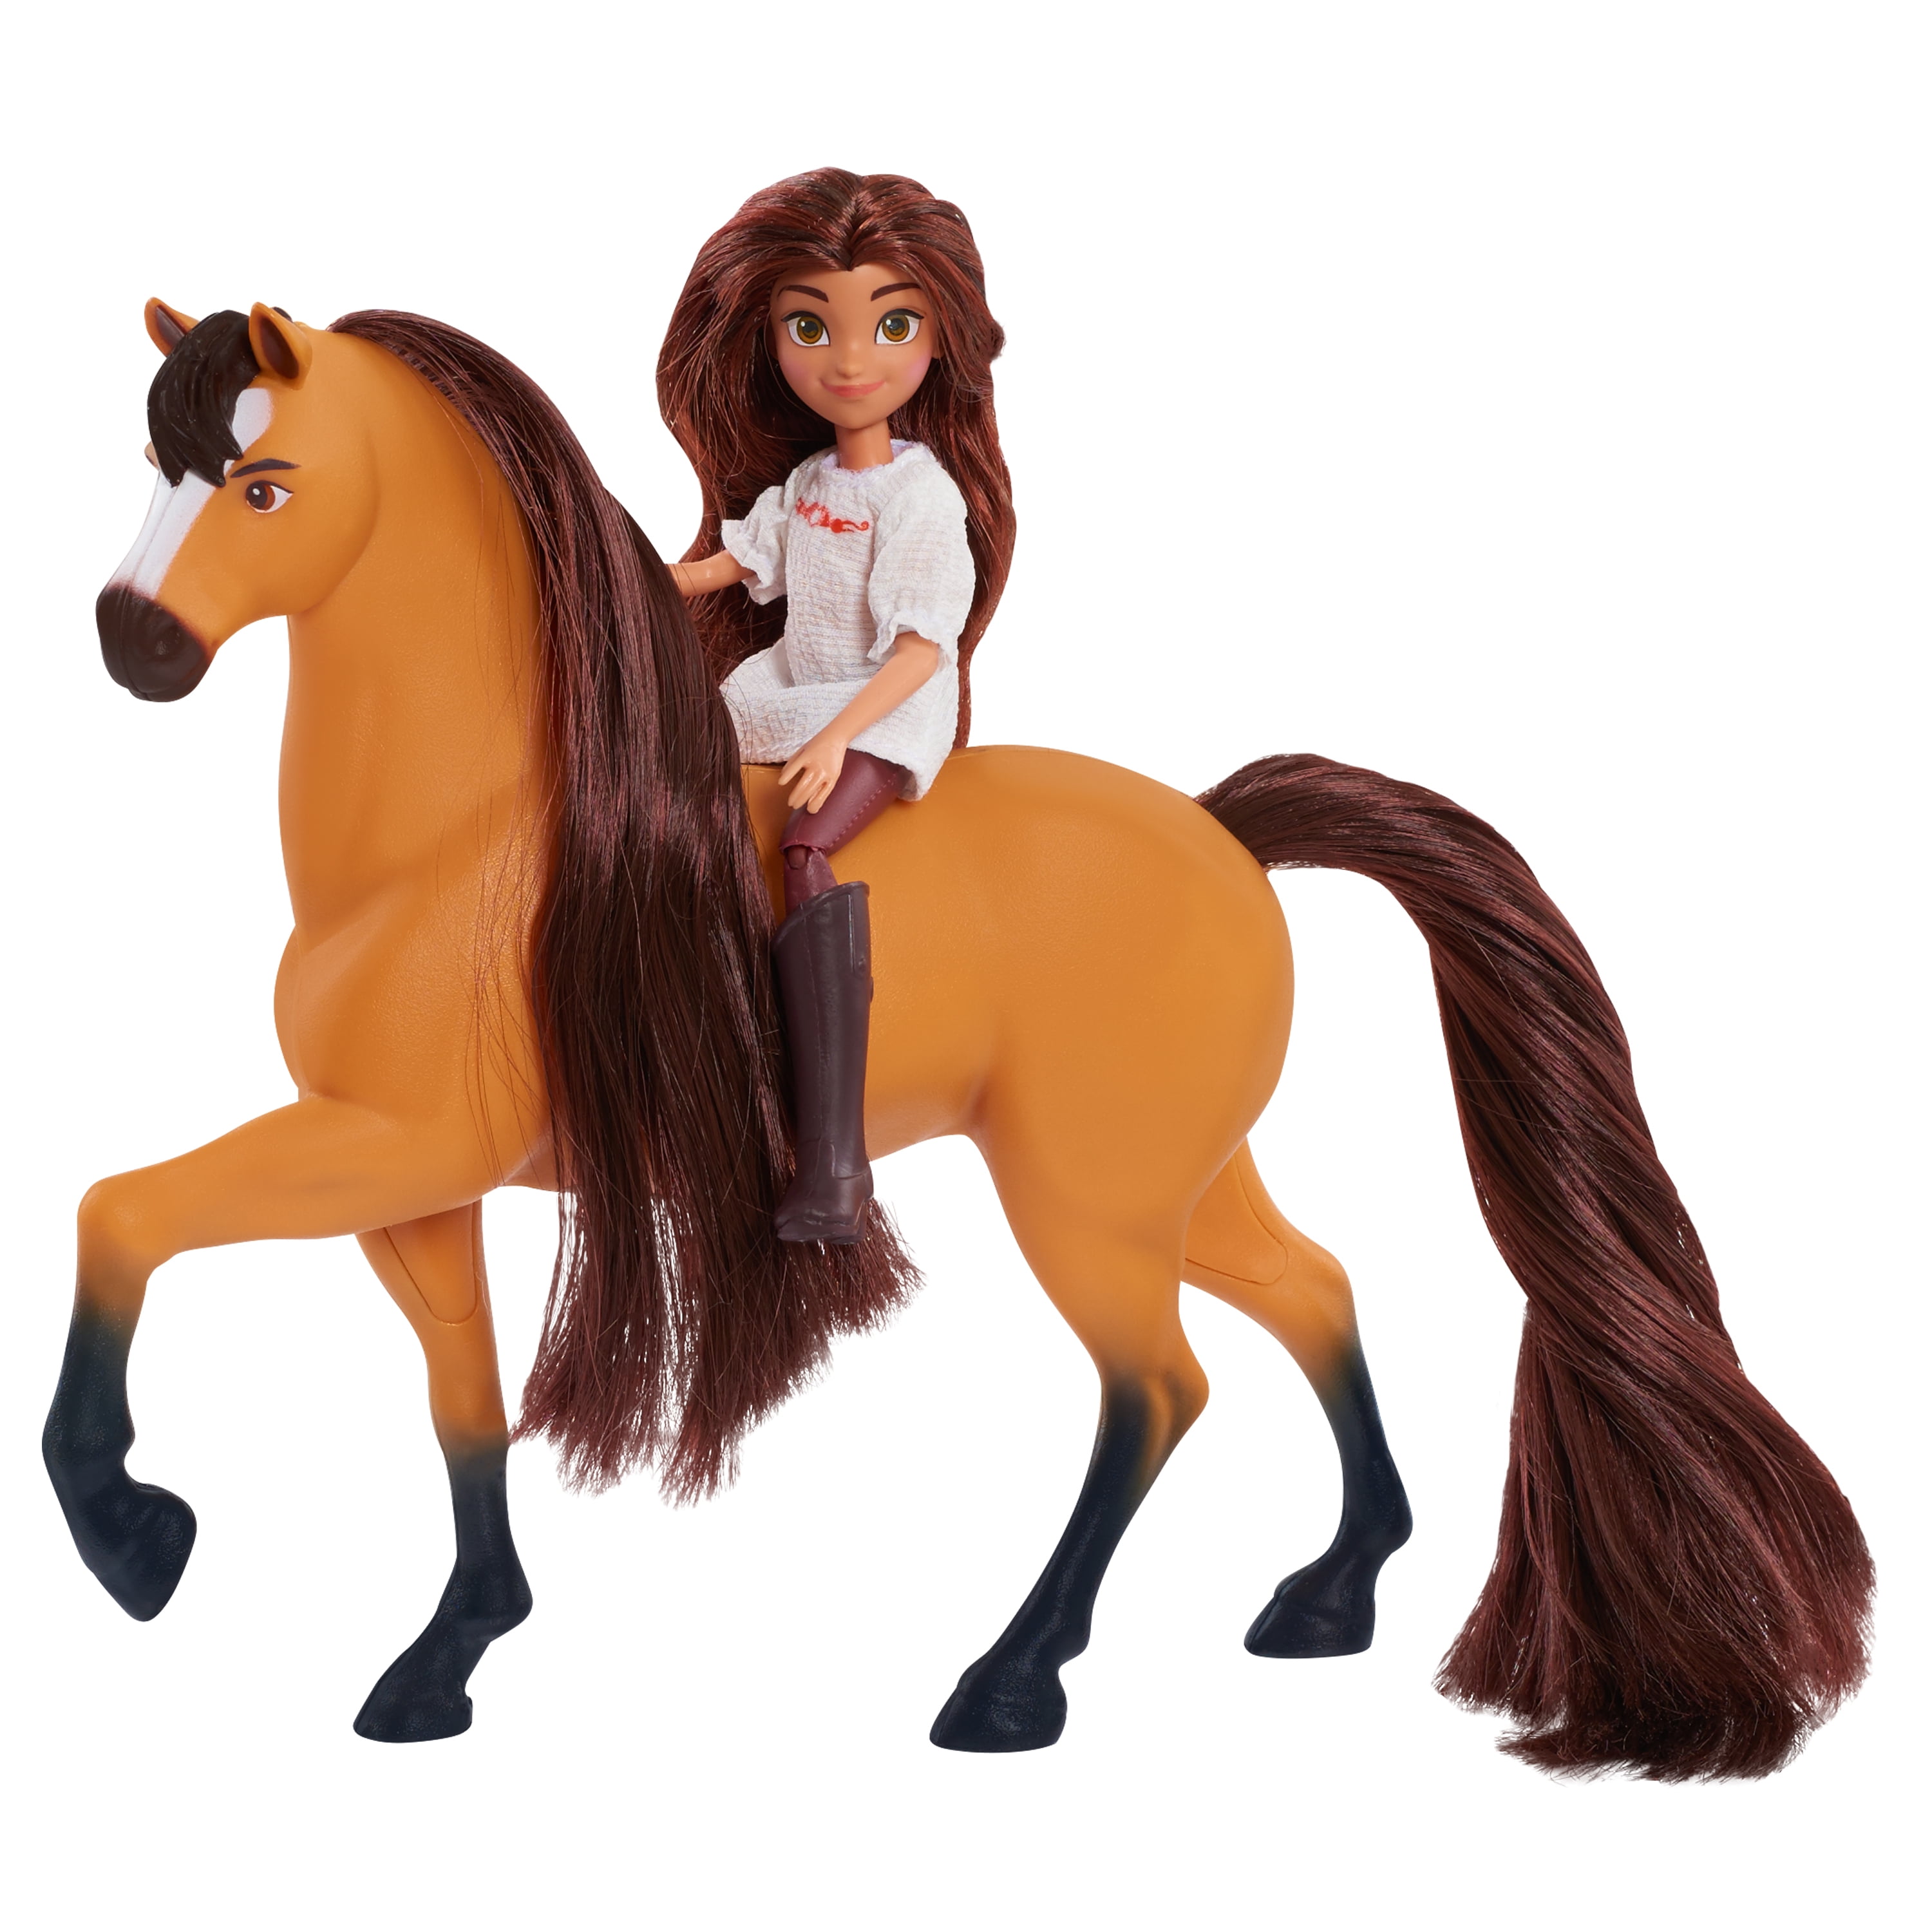 Details about  / DreamWorks Spirit Riding Free Lucky /& Spirit Small Doll /& Horse  2019 NIB